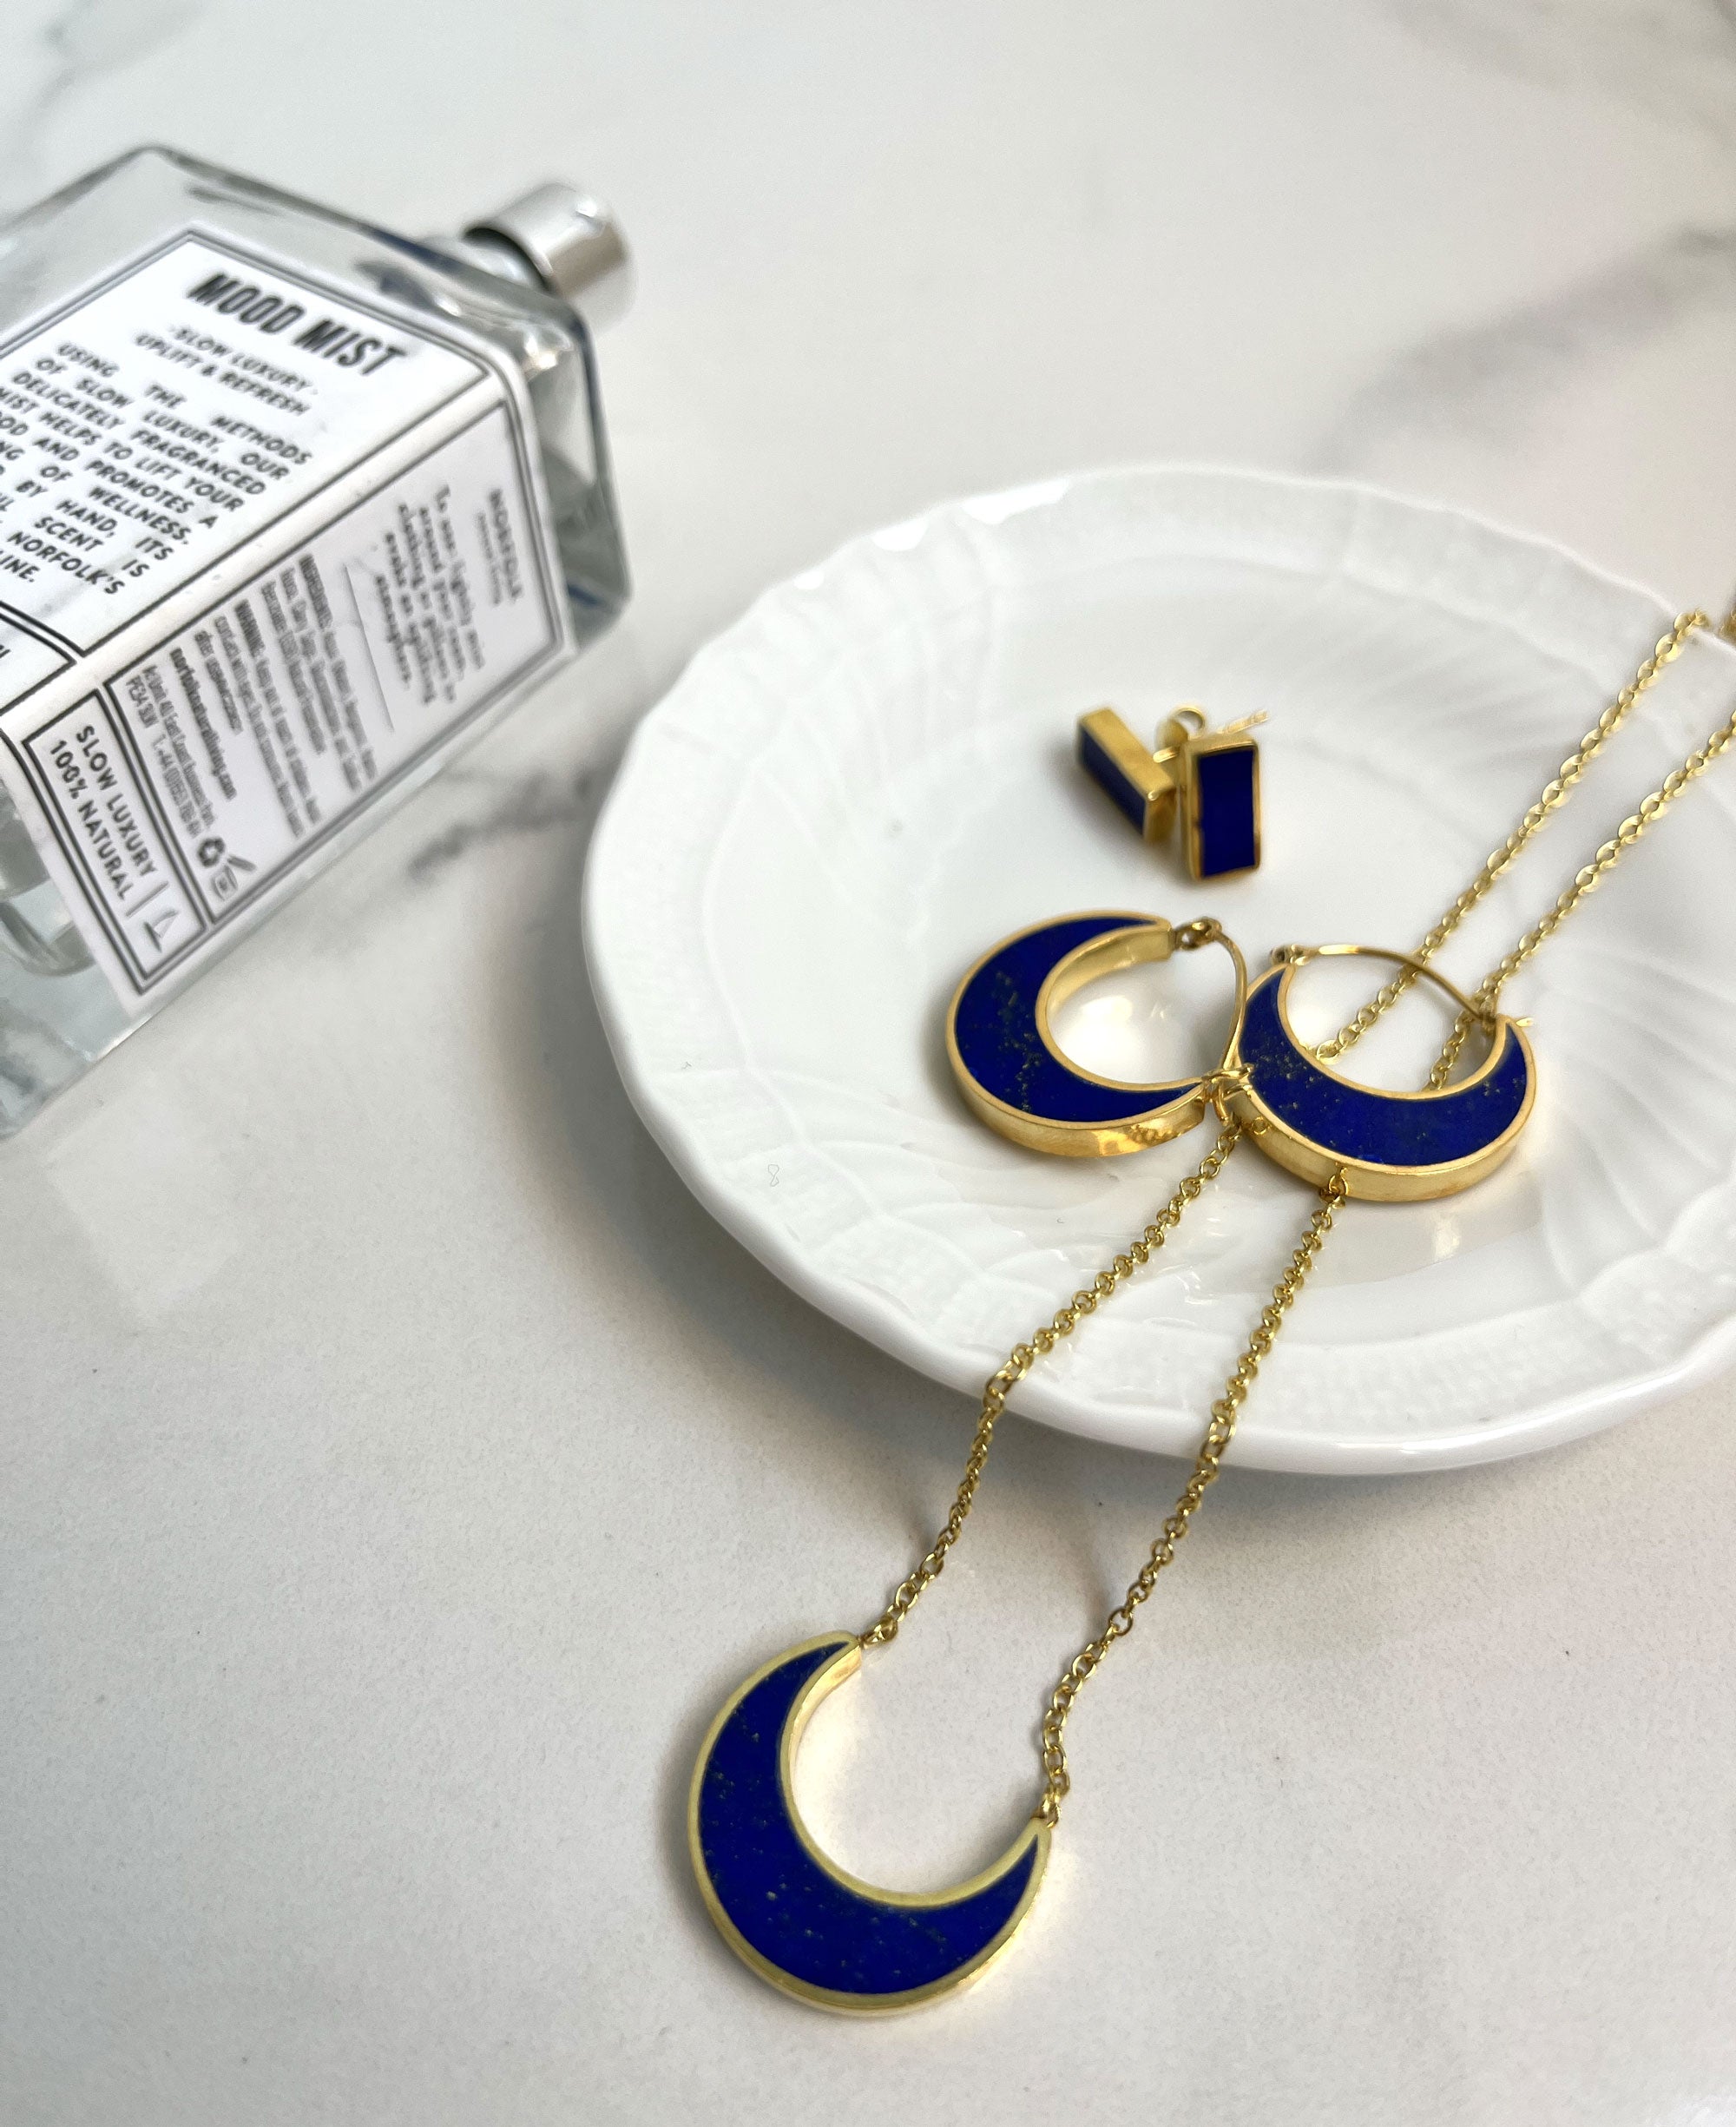 Farah Lapis Crescent Moon Pendant Necklace | Sustainable Jewellery by Ottoman Hands